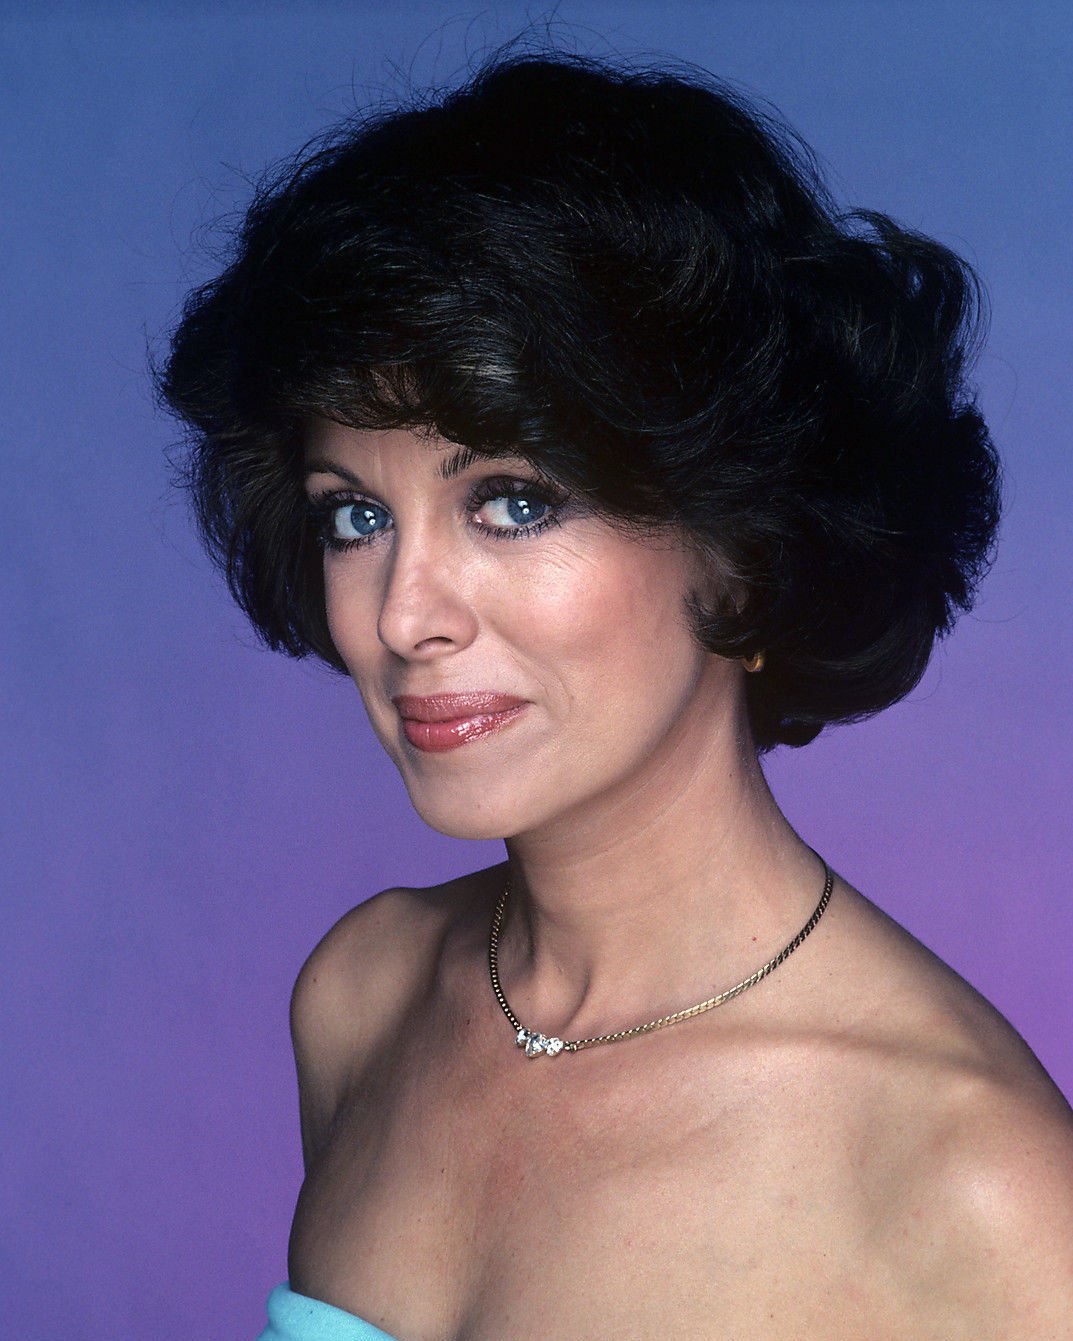 Actress phyllis davis poses for a portrait session at home in circa 1982 in...